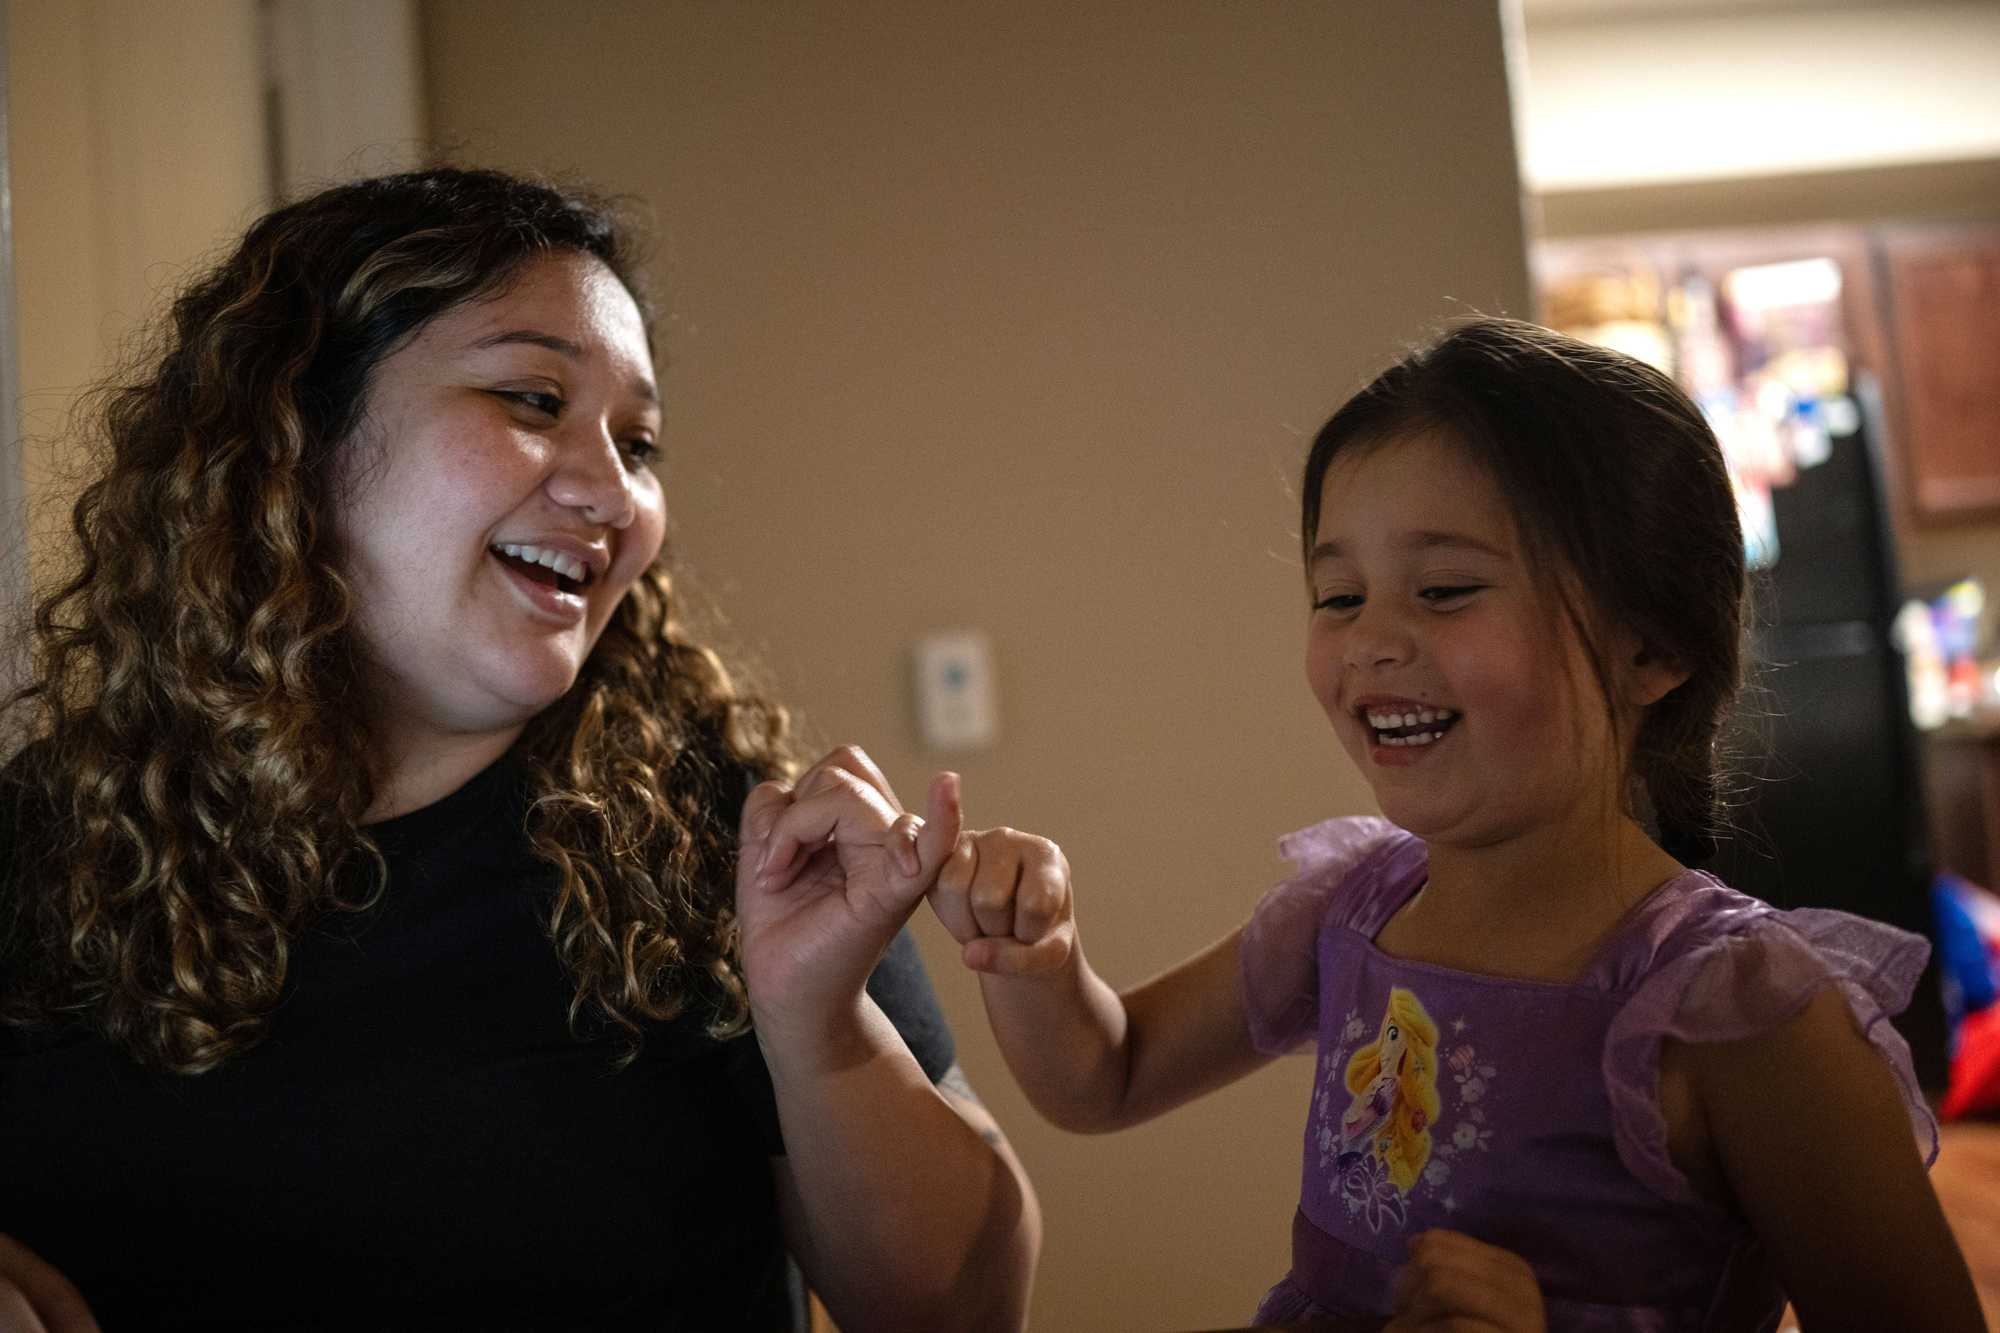 Osuna talked to Jae before putting her to bed. She hopes to one day work in a role that provides support to families like hers, connecting them to life-changing programs. (Tamir Kalifa for The Boston Globe)